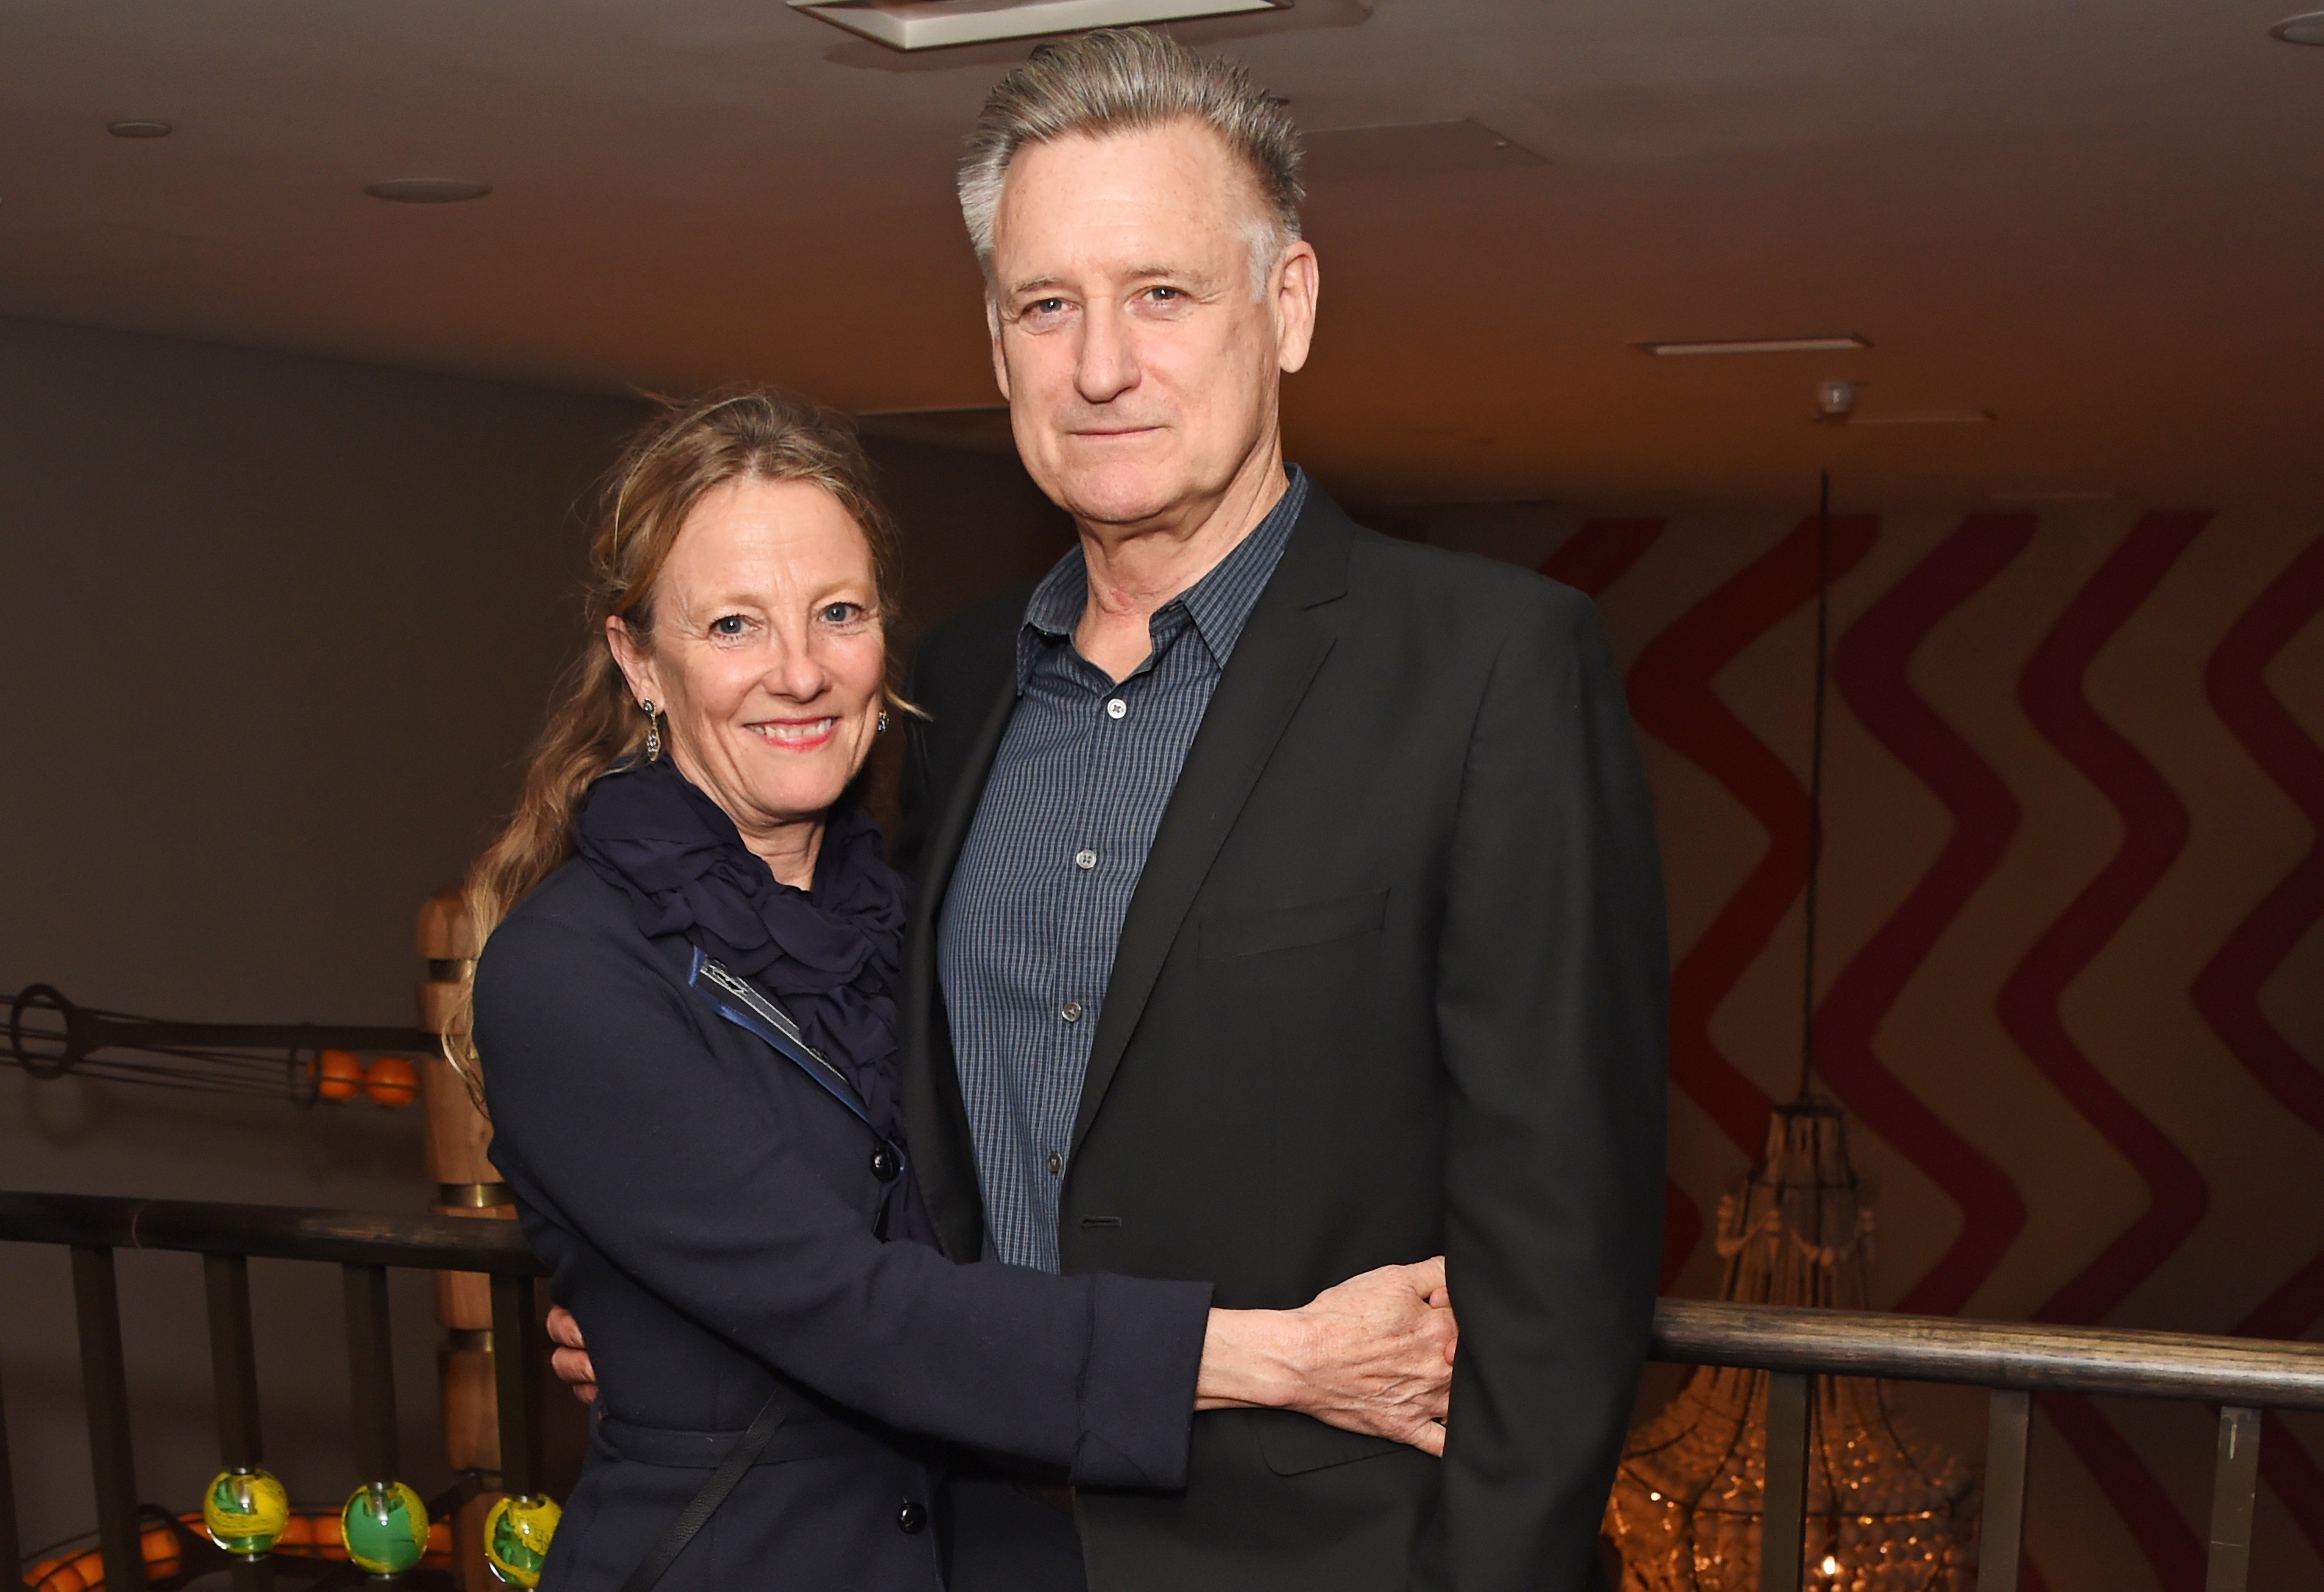 Tamara Hurwitz and Bill Pullman at The Ham Yard Hotel on April 23, 2019 in London, England | Source: Getty Images